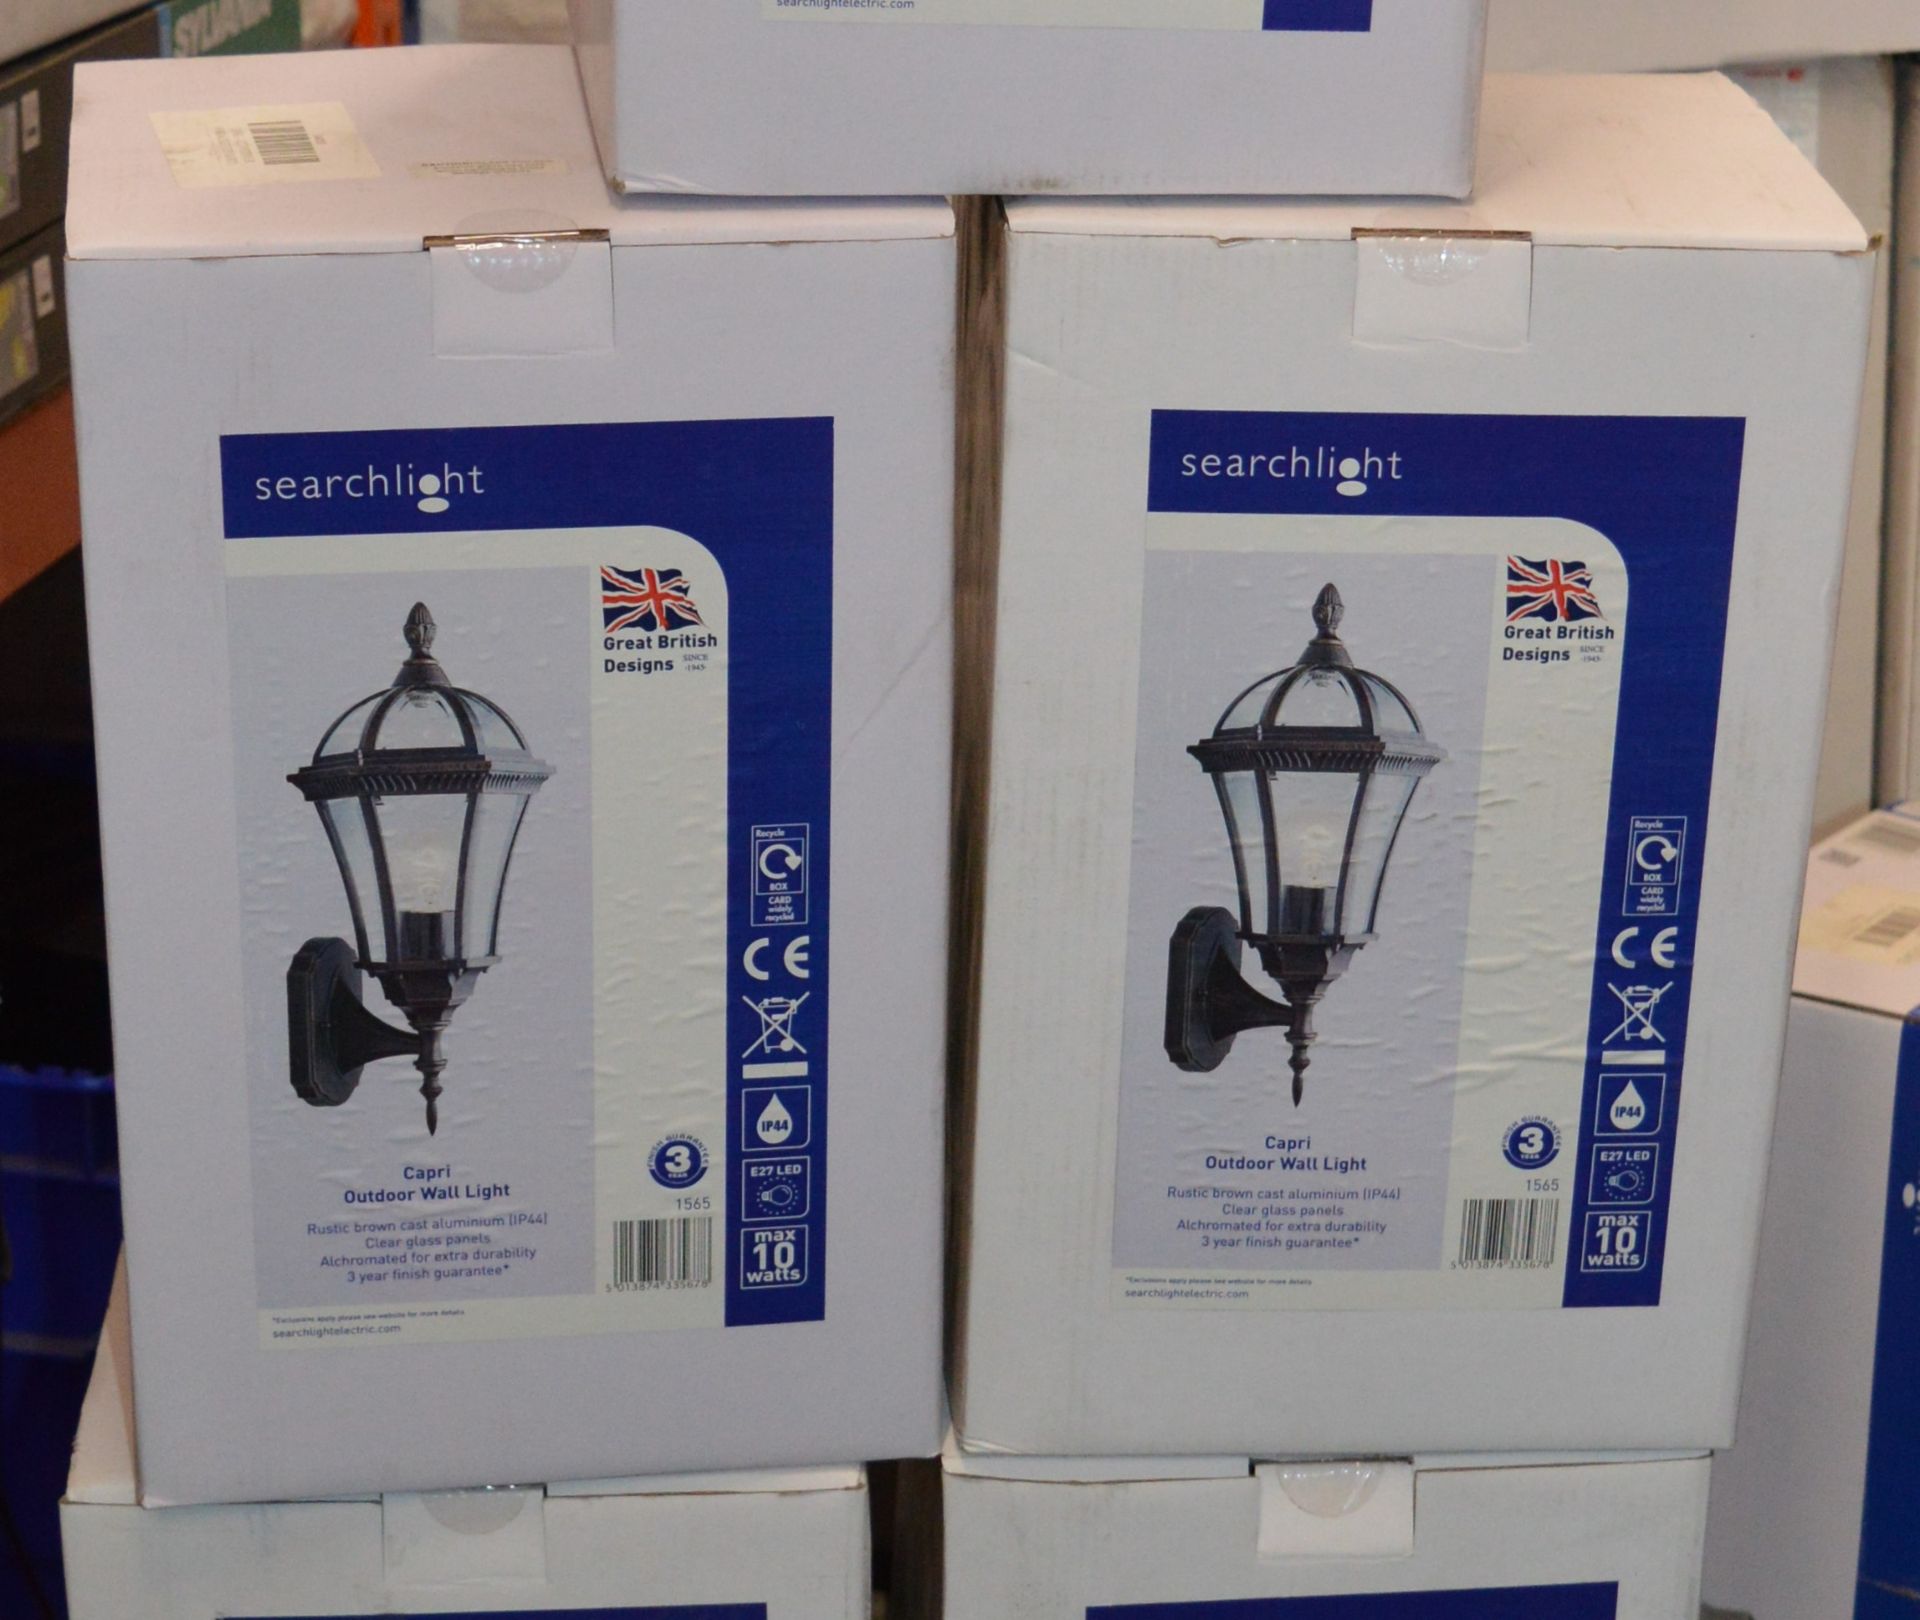 5 x Searchlight Capri Outdoor Wall Lights - Rustic Brown Cast Aluminium IP44 Product Code 1565 - New - Image 3 of 3